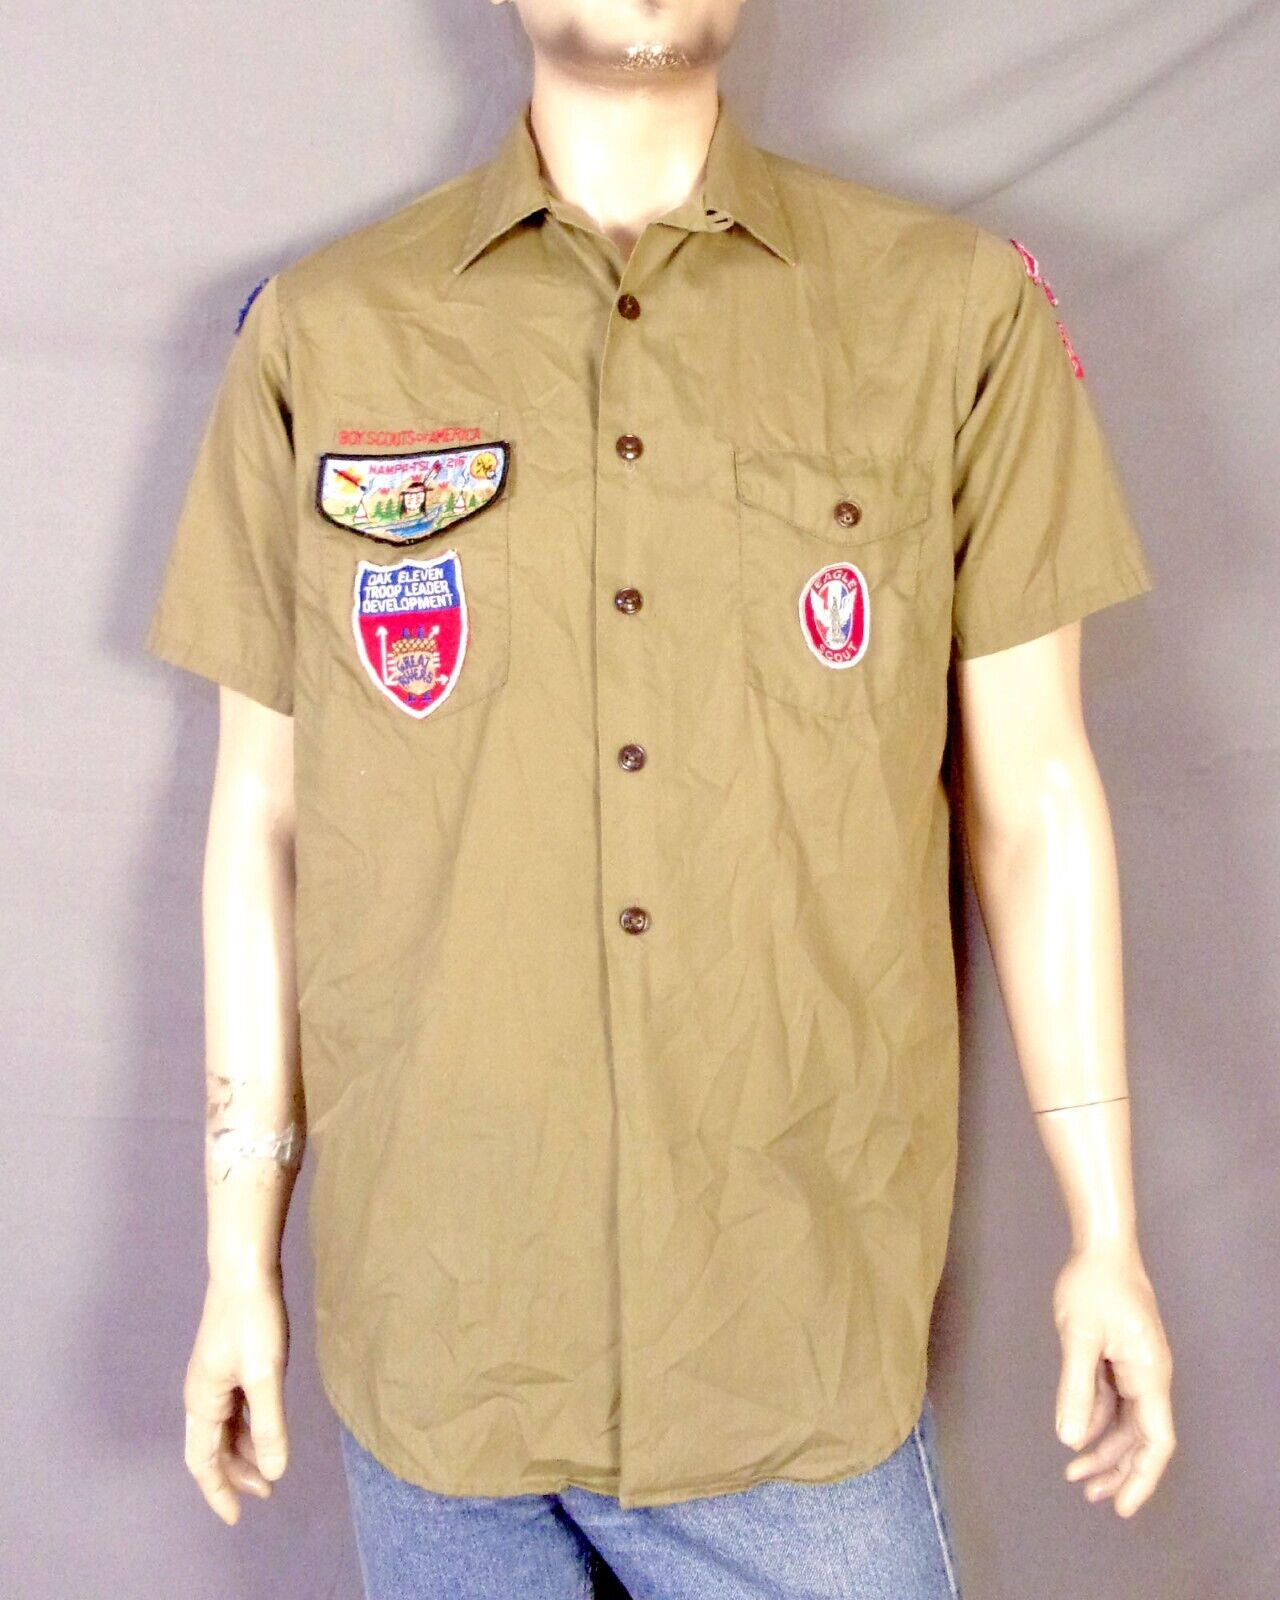 vintage 50s 60s BSA Boy Scouts Loop Collar Shirt RARE Patches Nampa-TSI Flap L